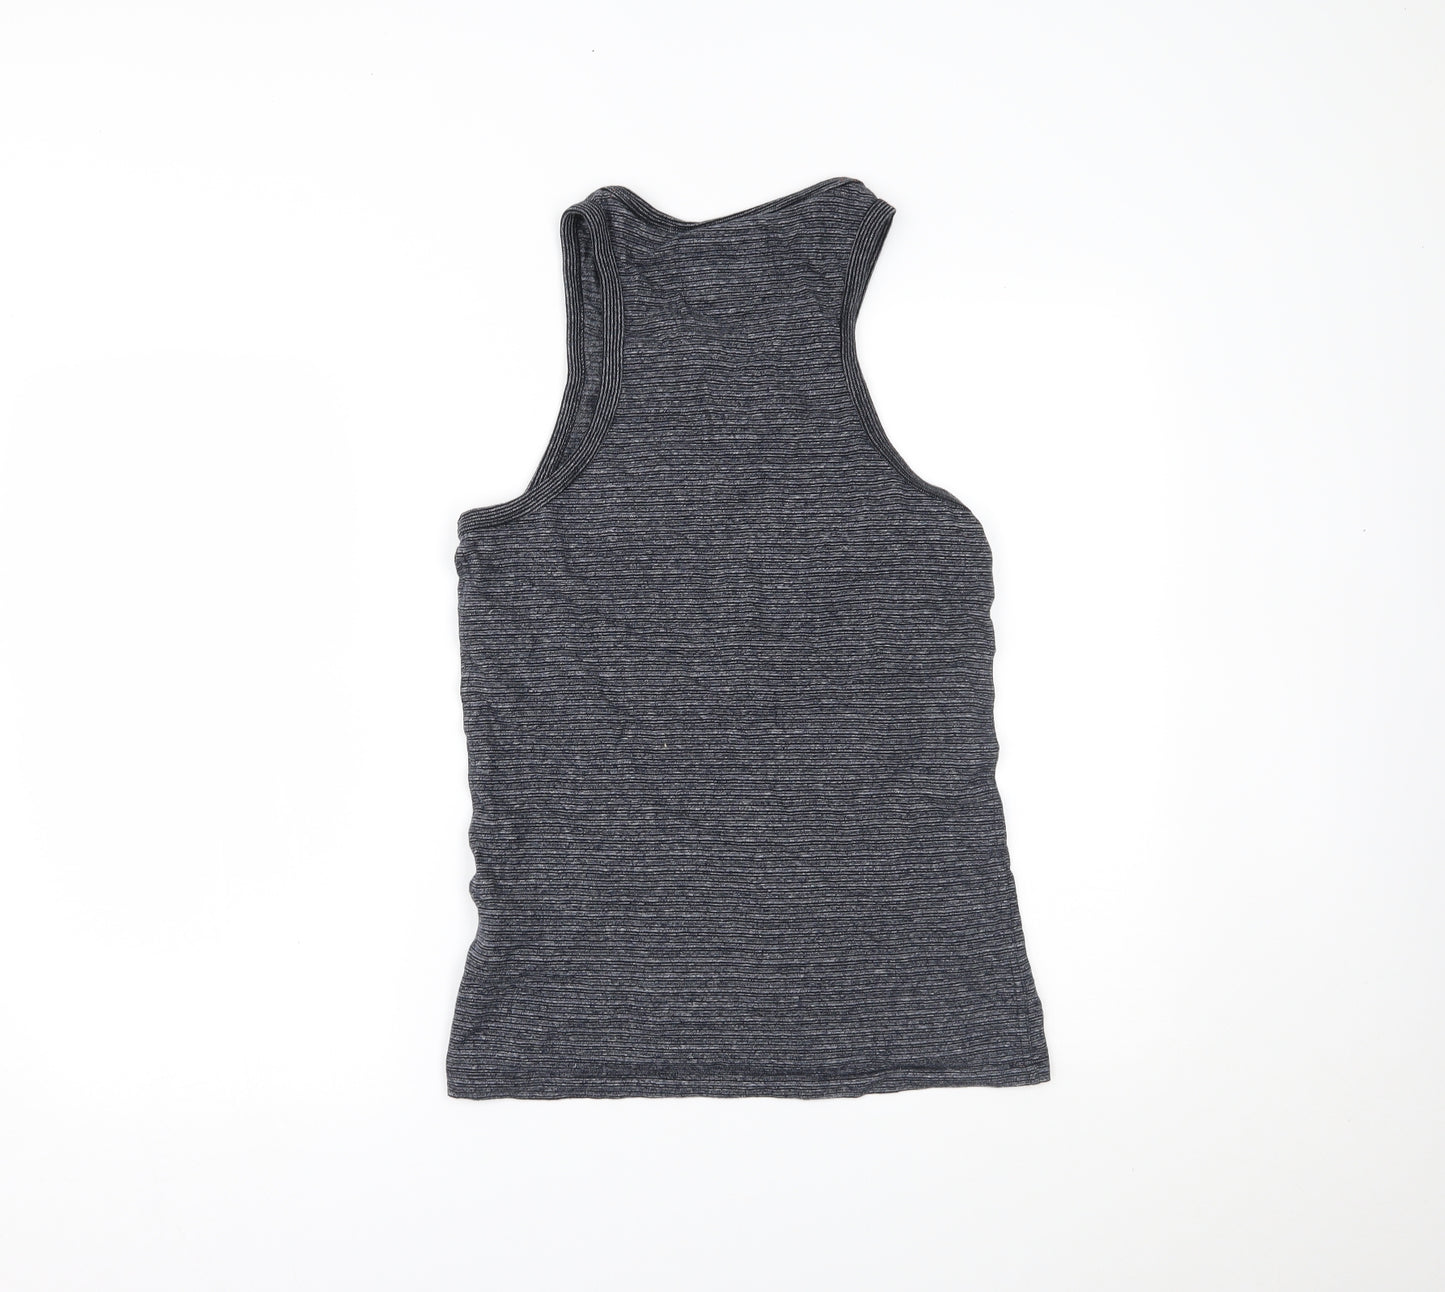 Superdry Mens Grey   Camisole Tank Size XS